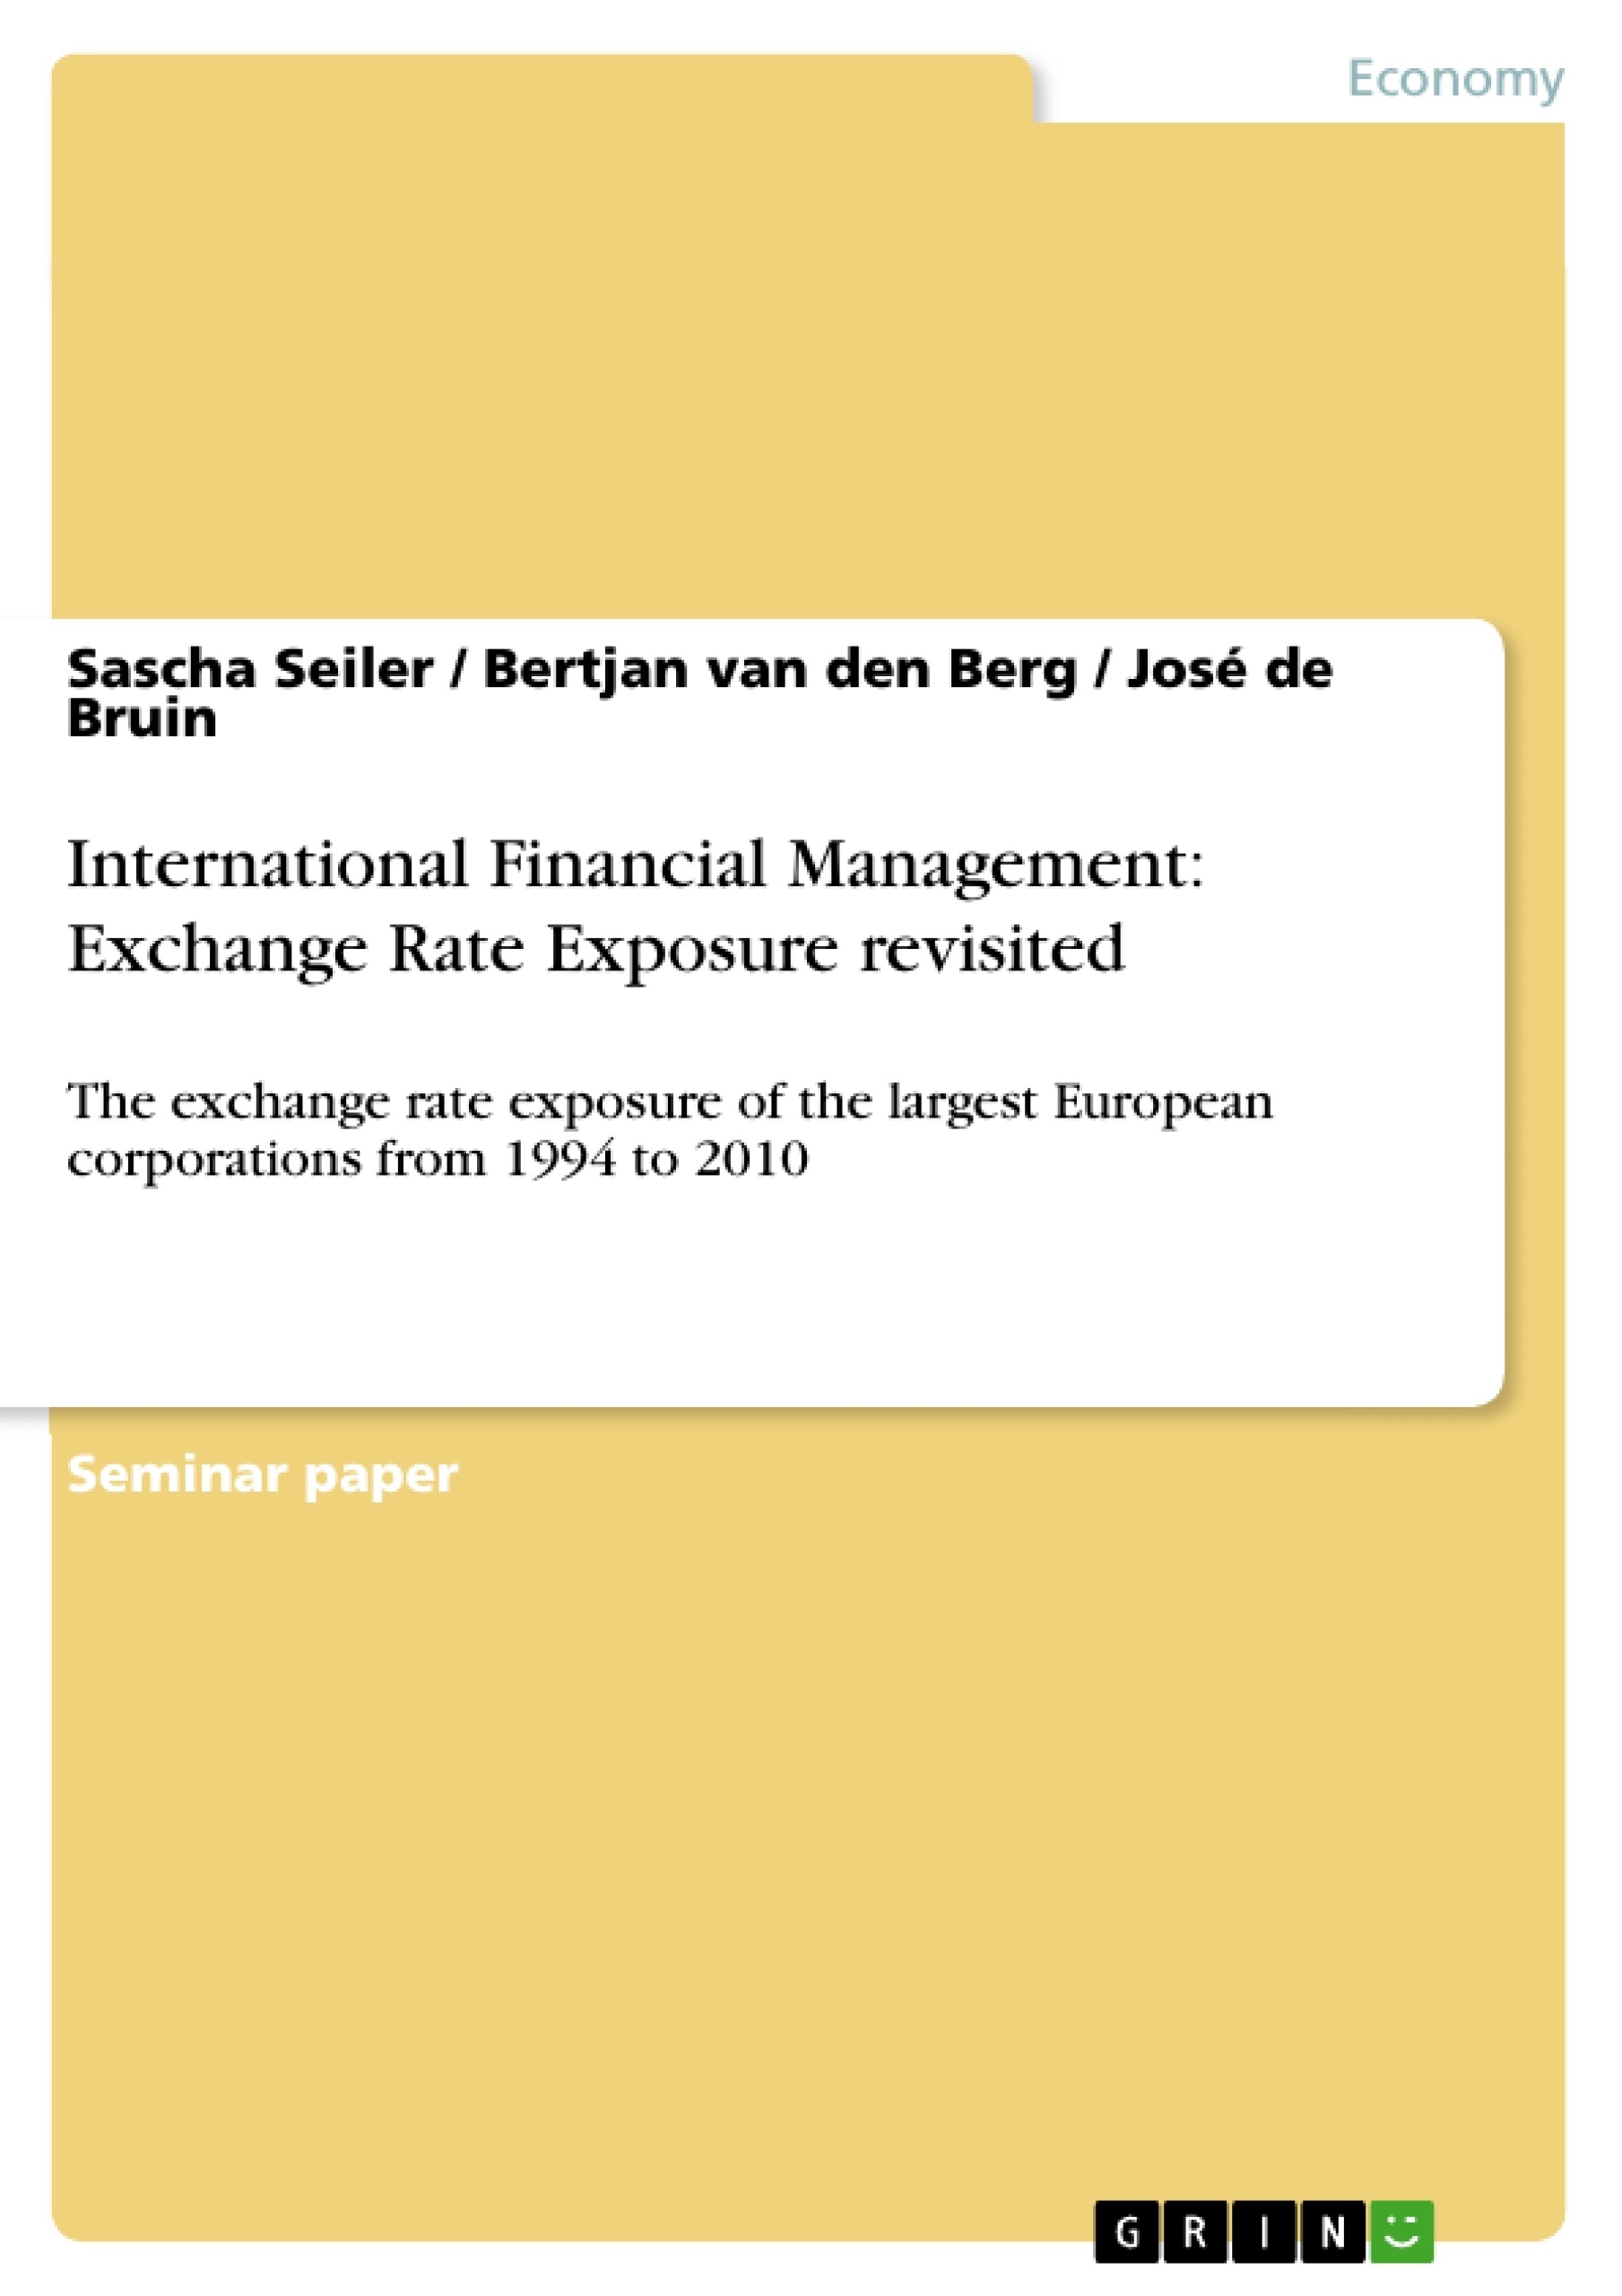 Title: International Financial Management: Exchange Rate Exposure revisited